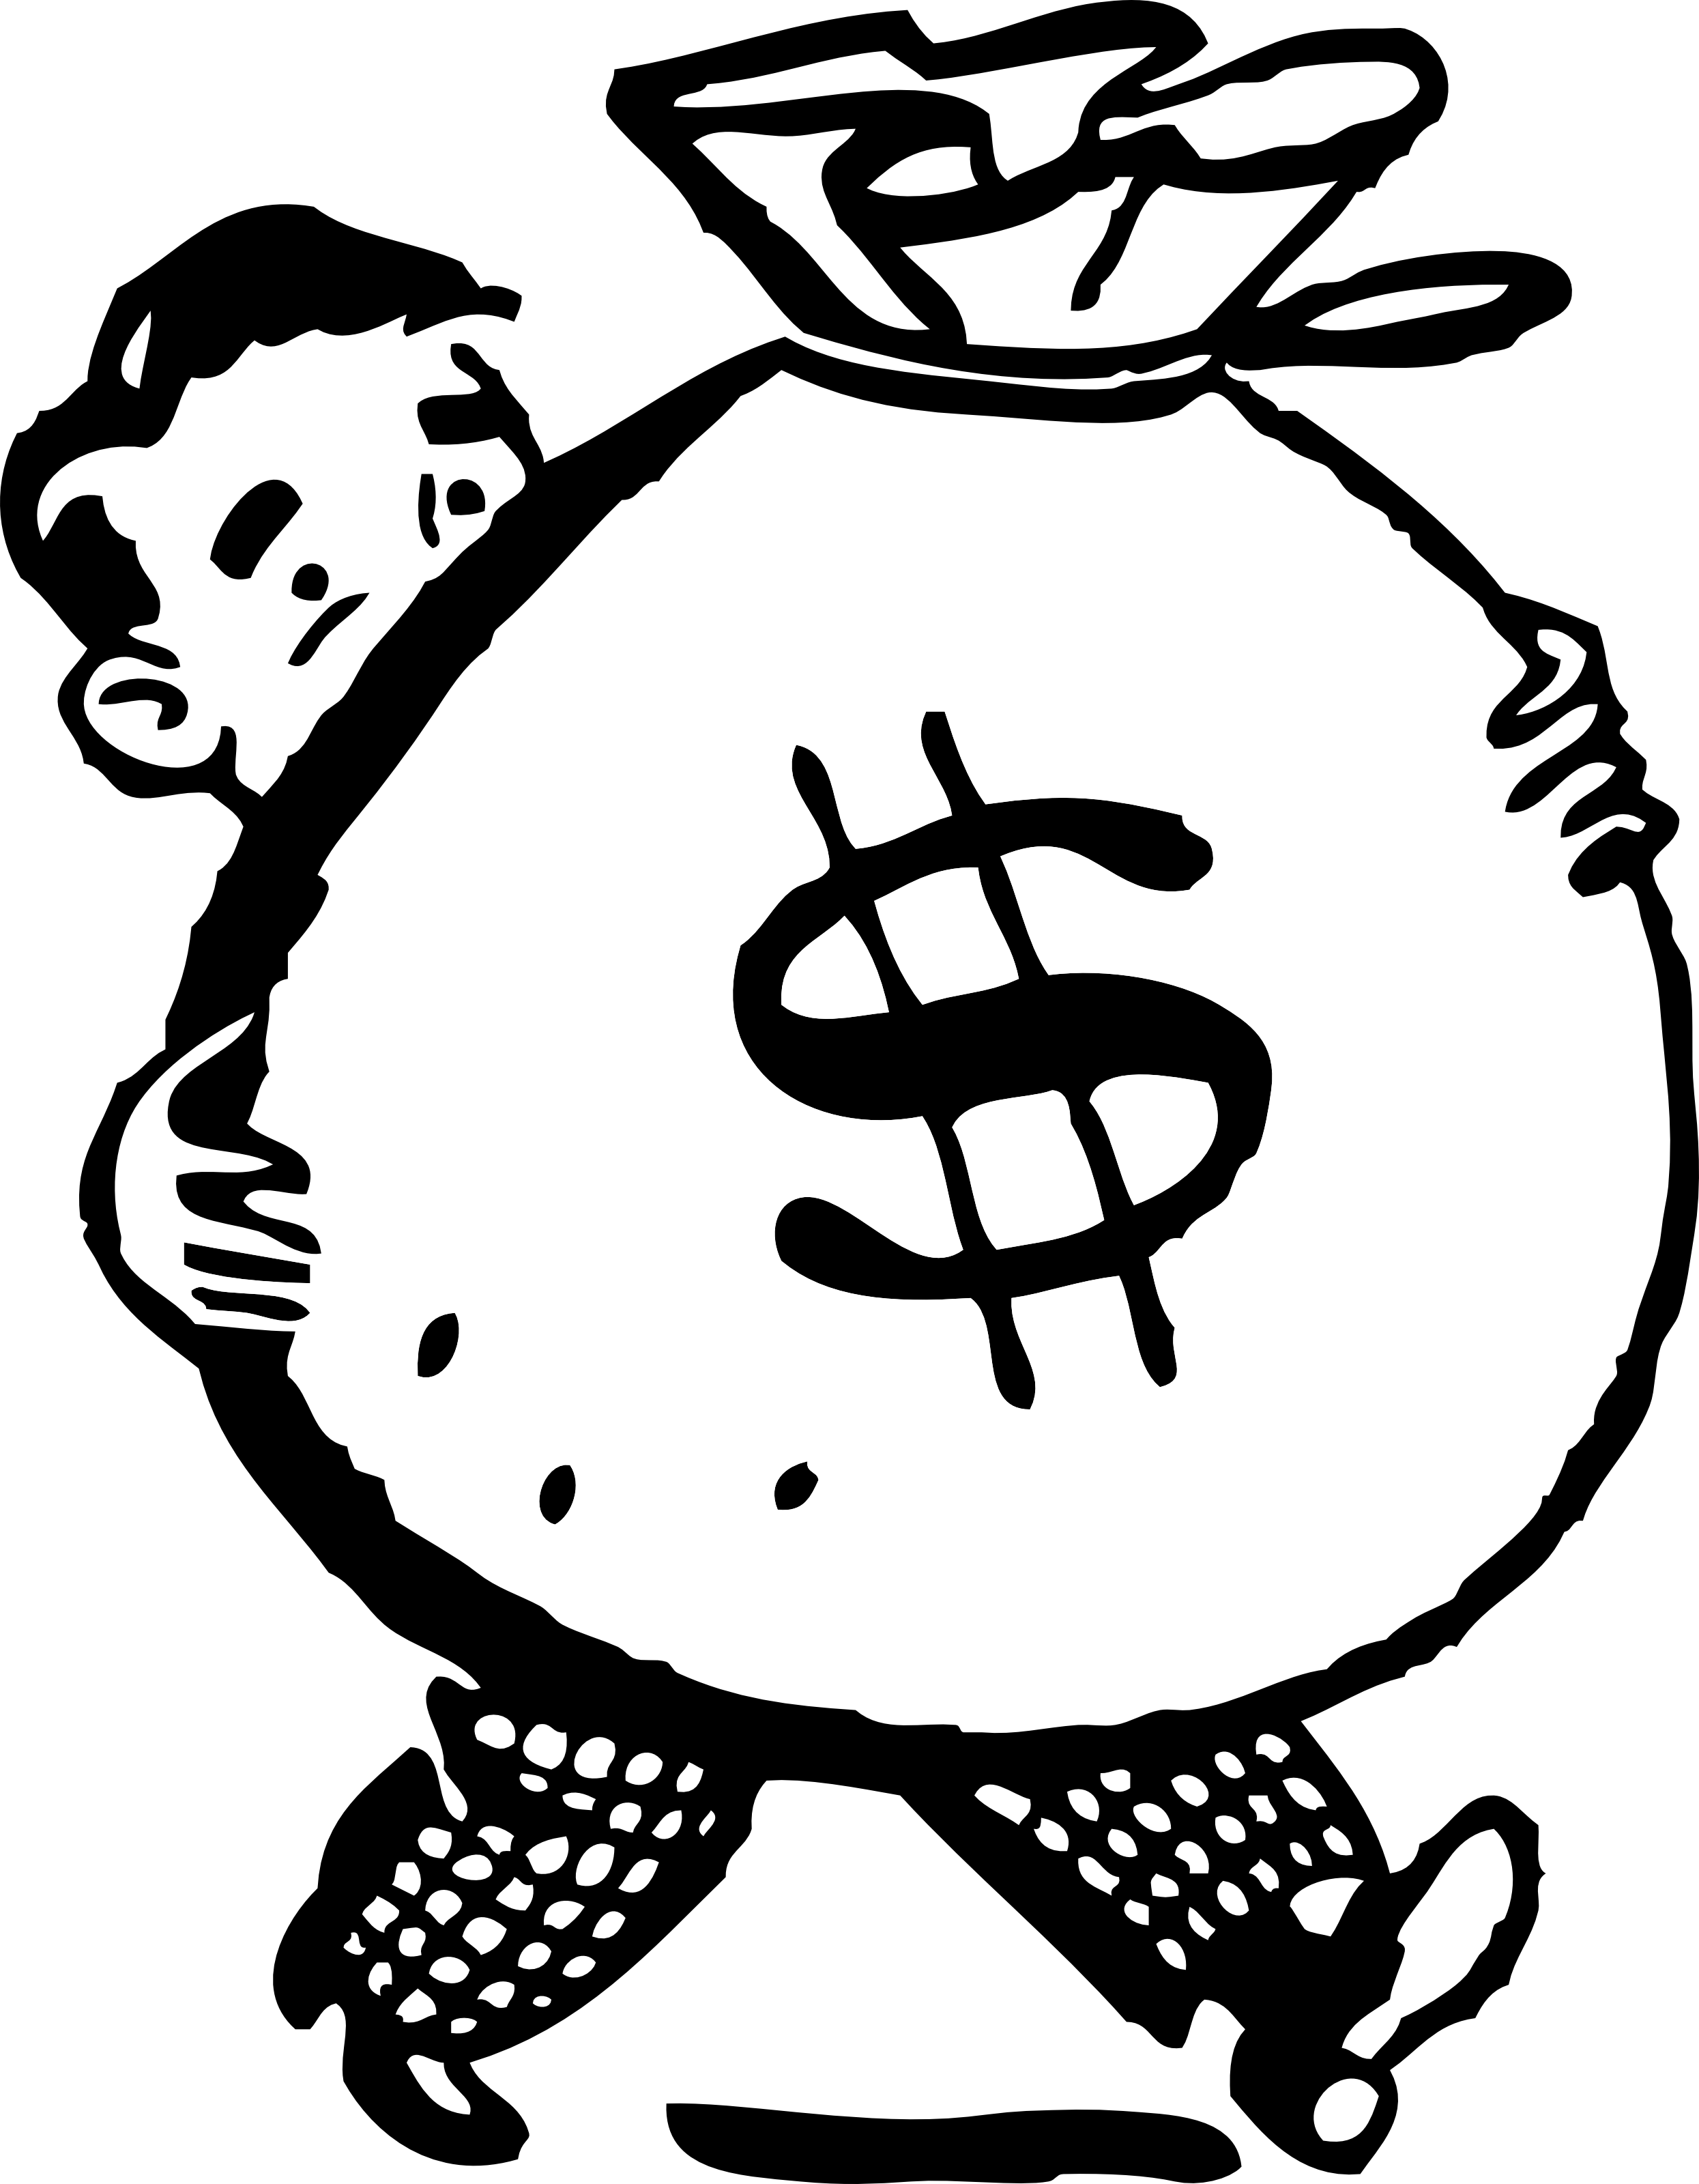 Dollar Signs Clip Art - Clipart library